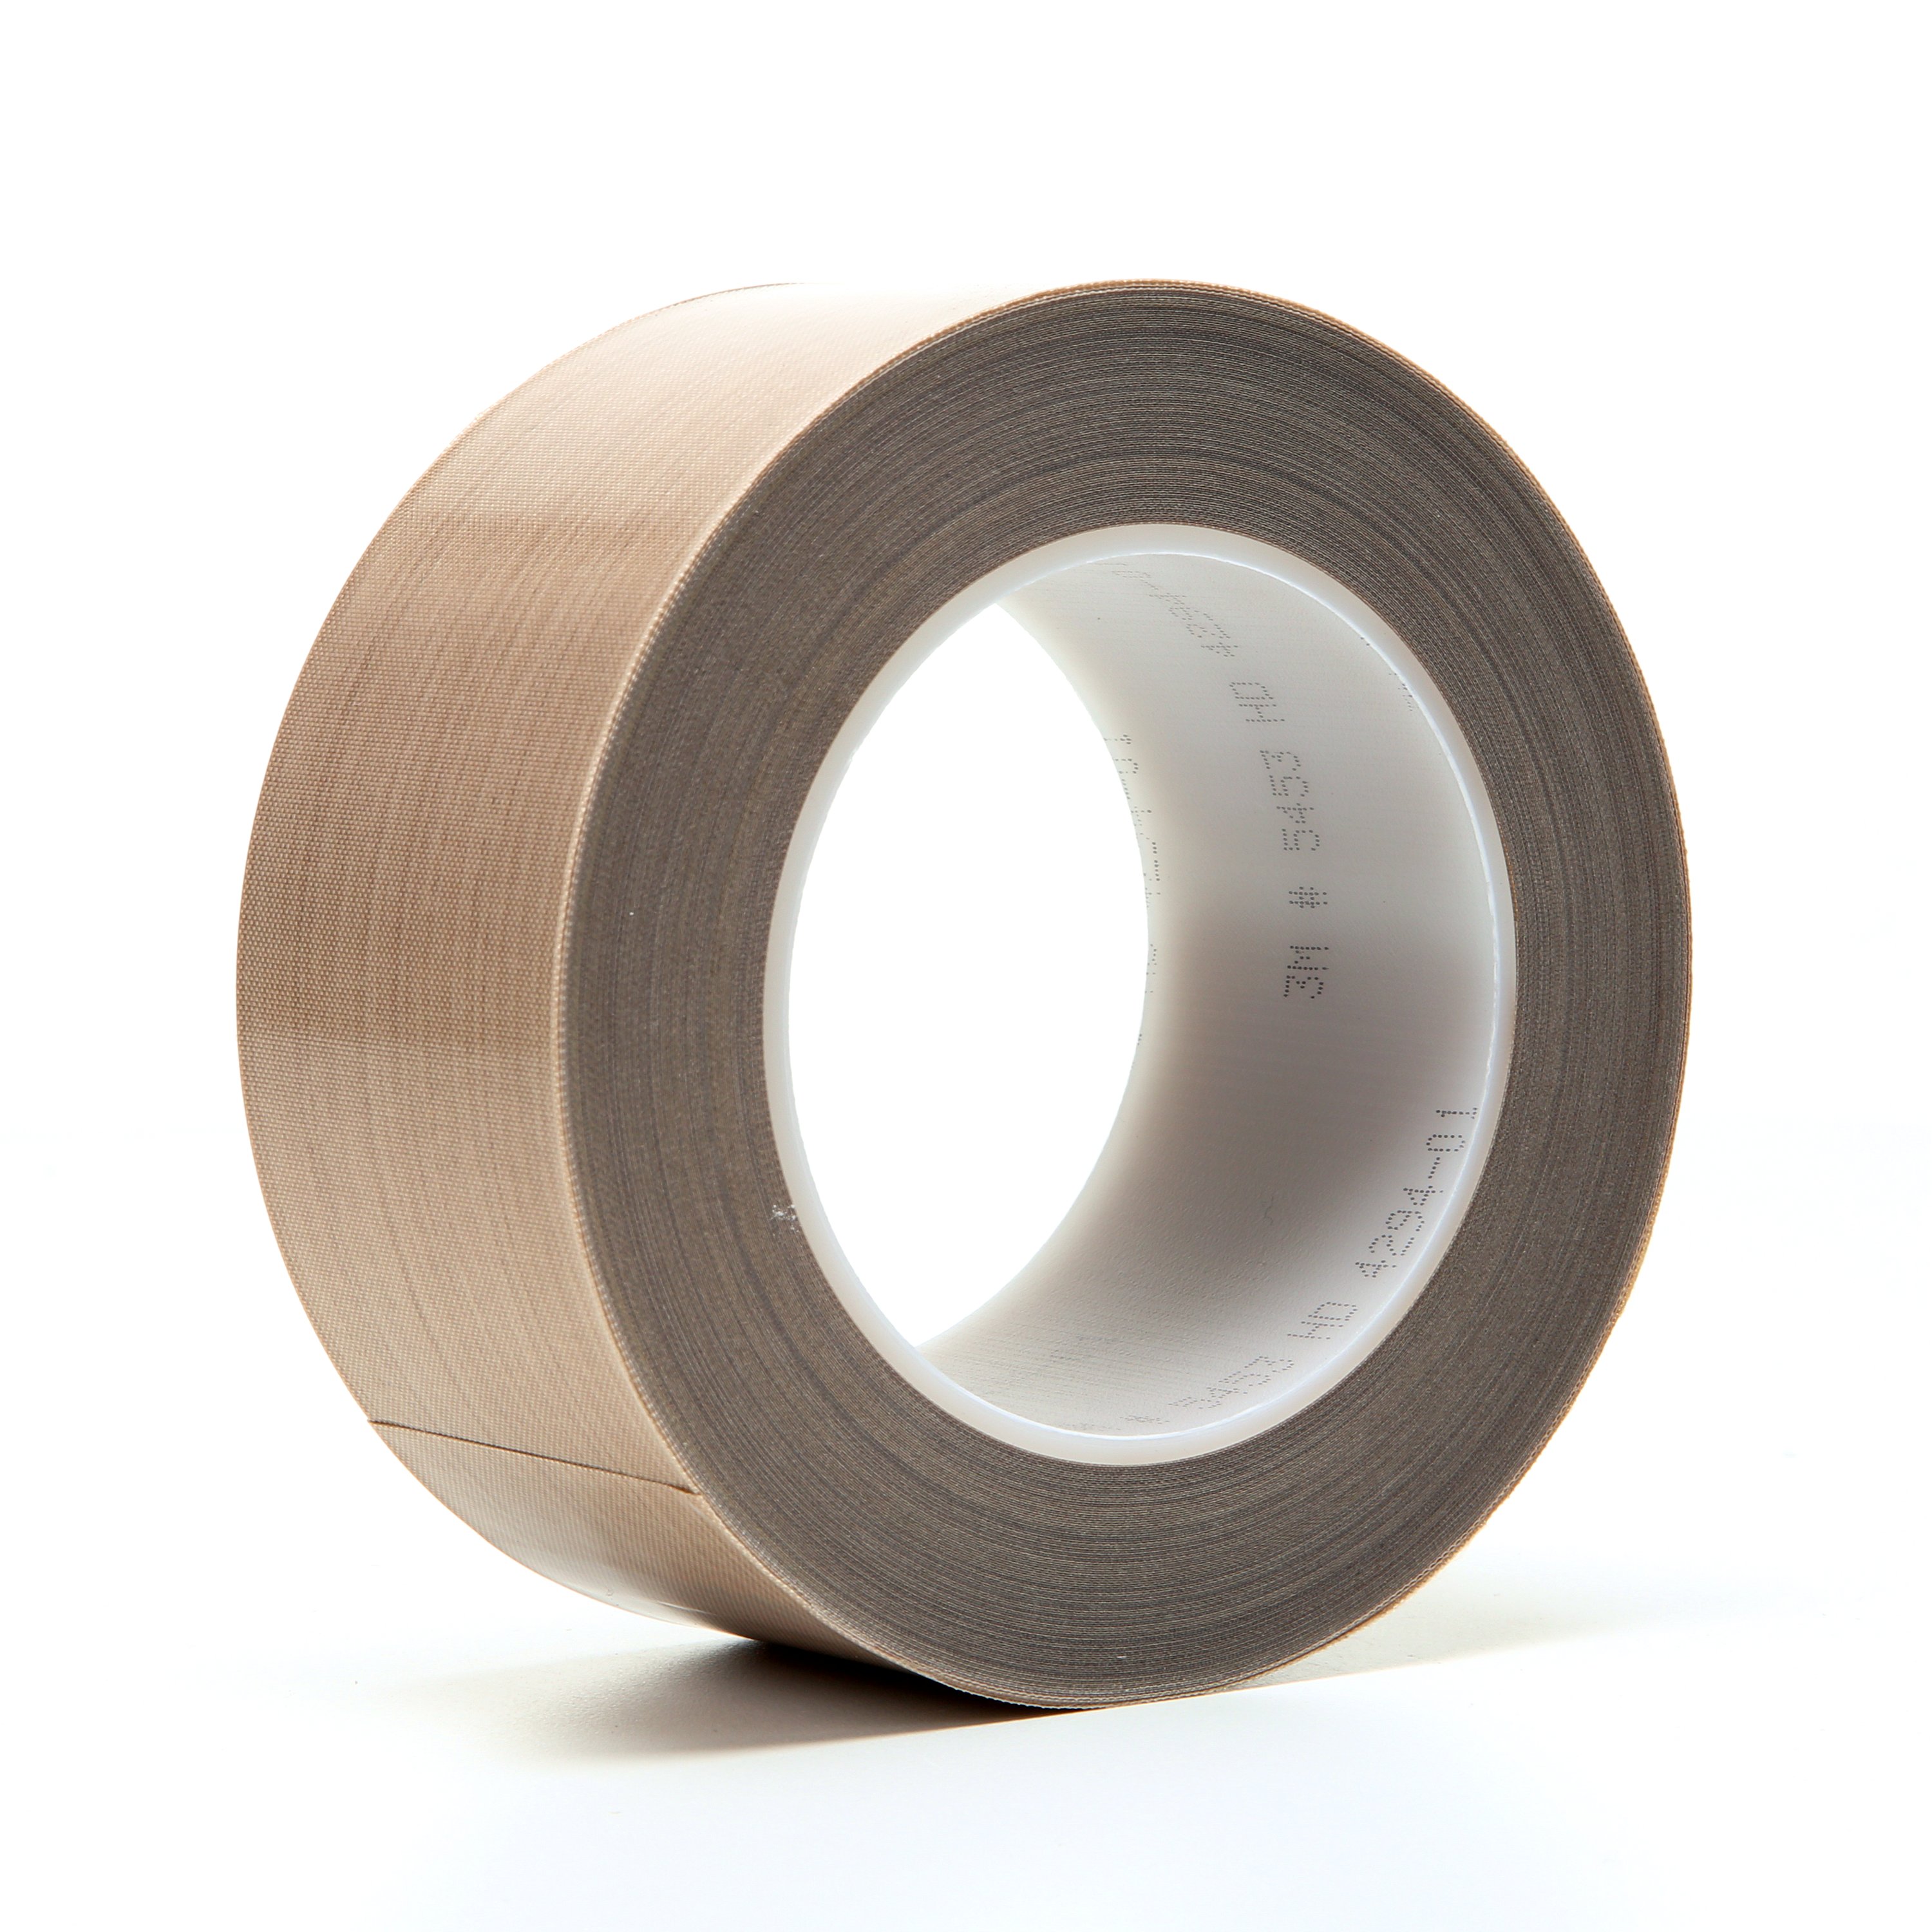 For high strength applications requiring increased durability, look no further than premium 3M™ PTFE Glass Cloth Tape 5453.